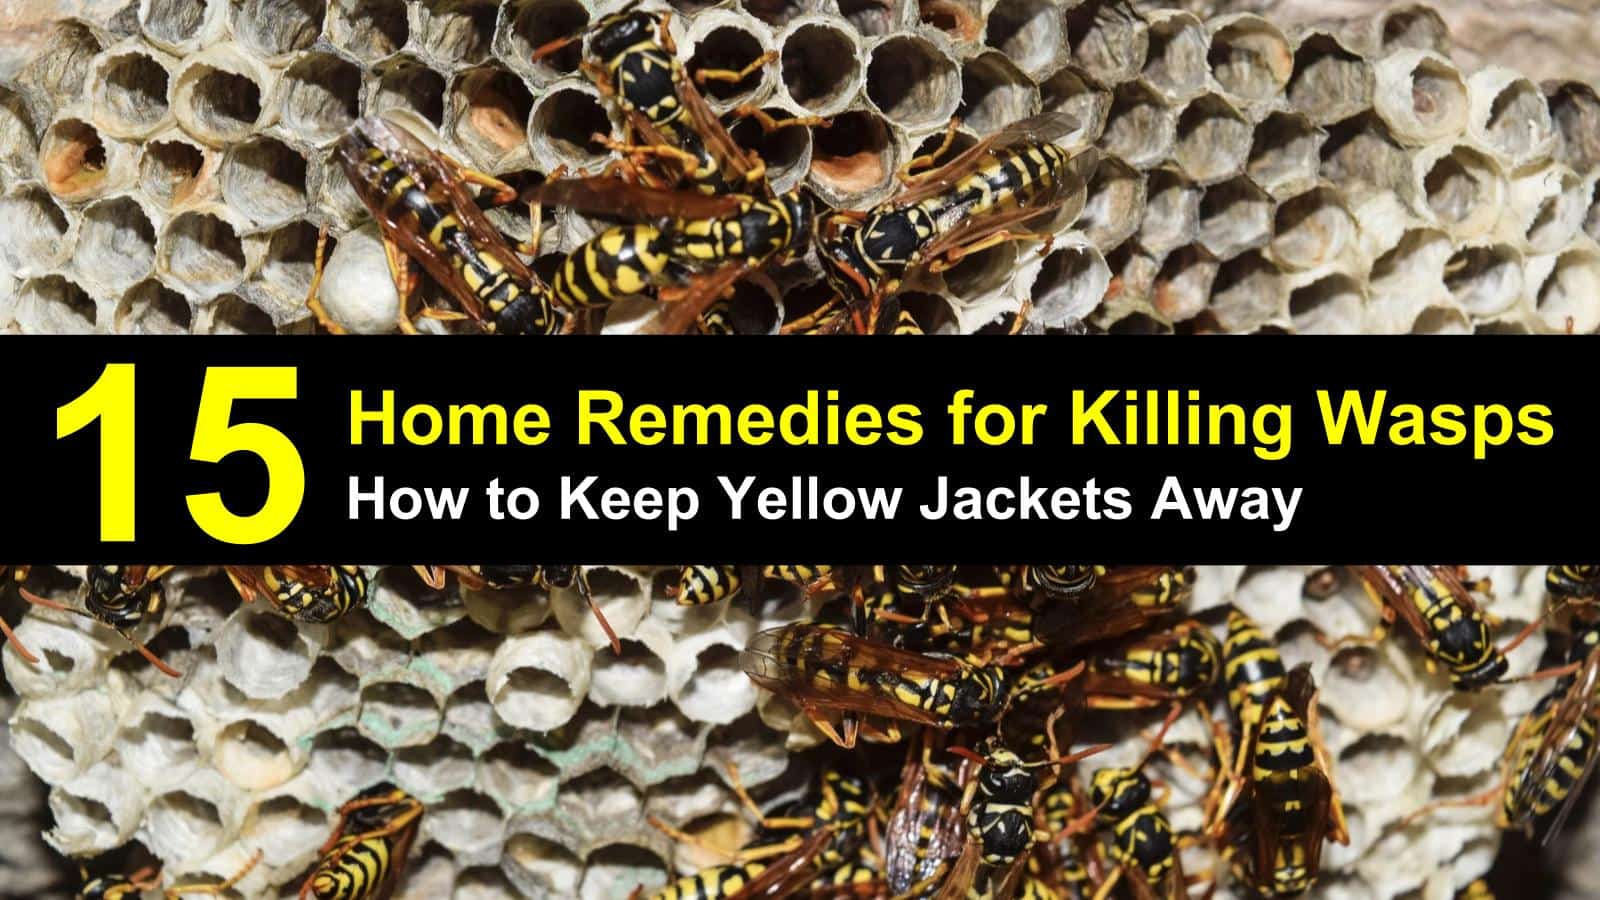 How To Keep Yellow Jackets Away From Your Home 15 Home Remedies For Killing Wasps